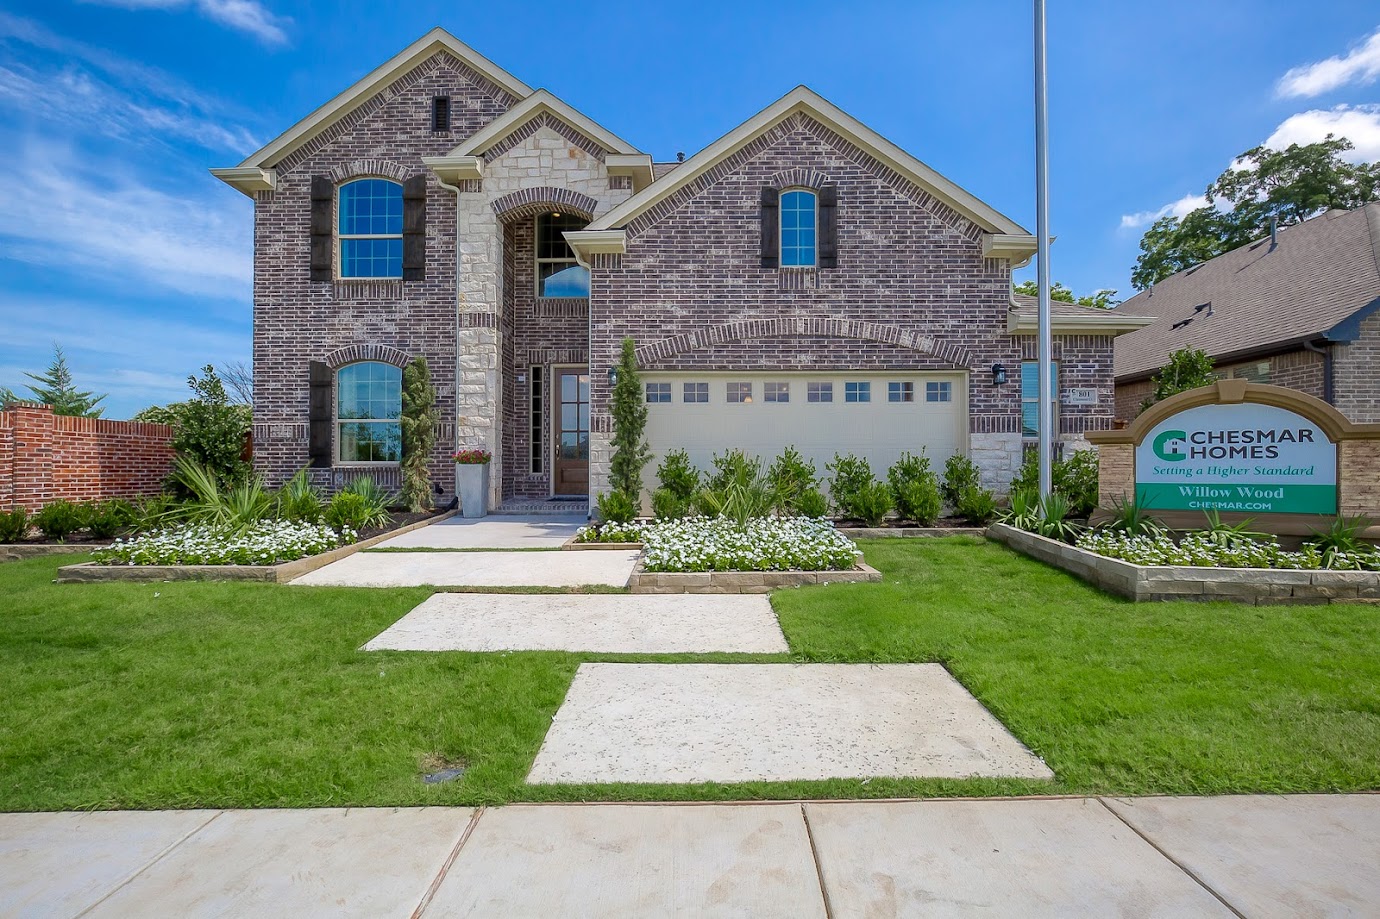 Chesmar Homes Willow Wood